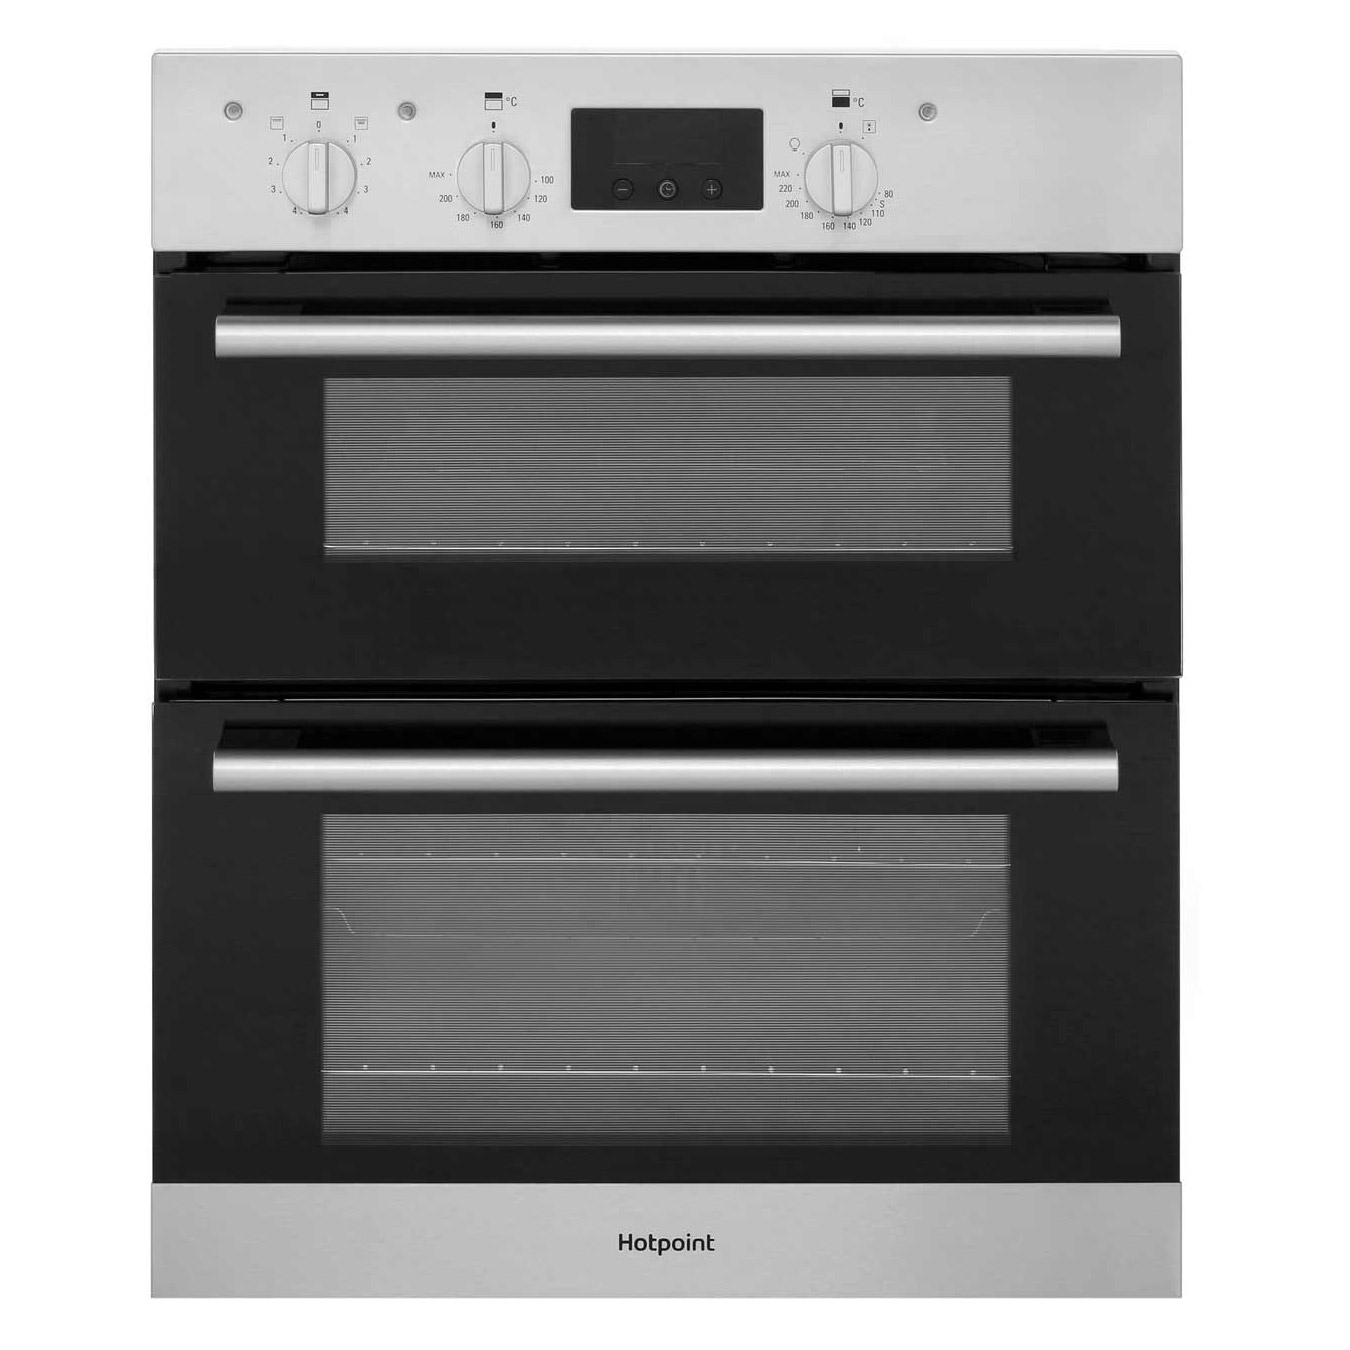 Image of Hotpoint DU2540IX 60cm Built Under Double Electric Fan Oven in St Stee